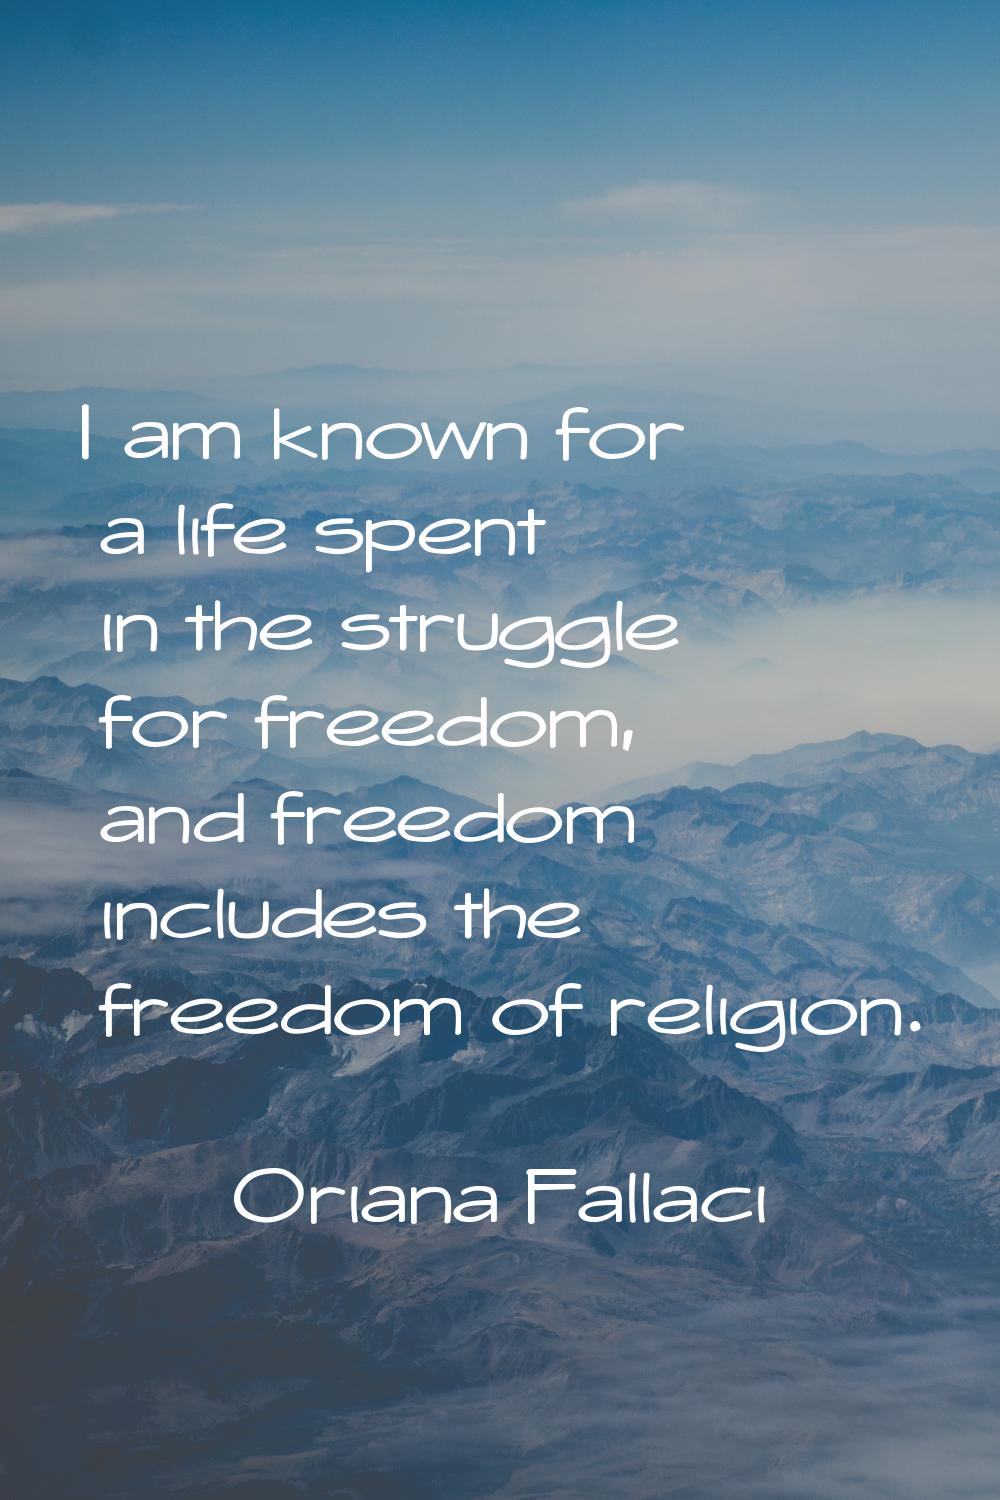 I am known for a life spent in the struggle for freedom, and freedom includes the freedom of religi